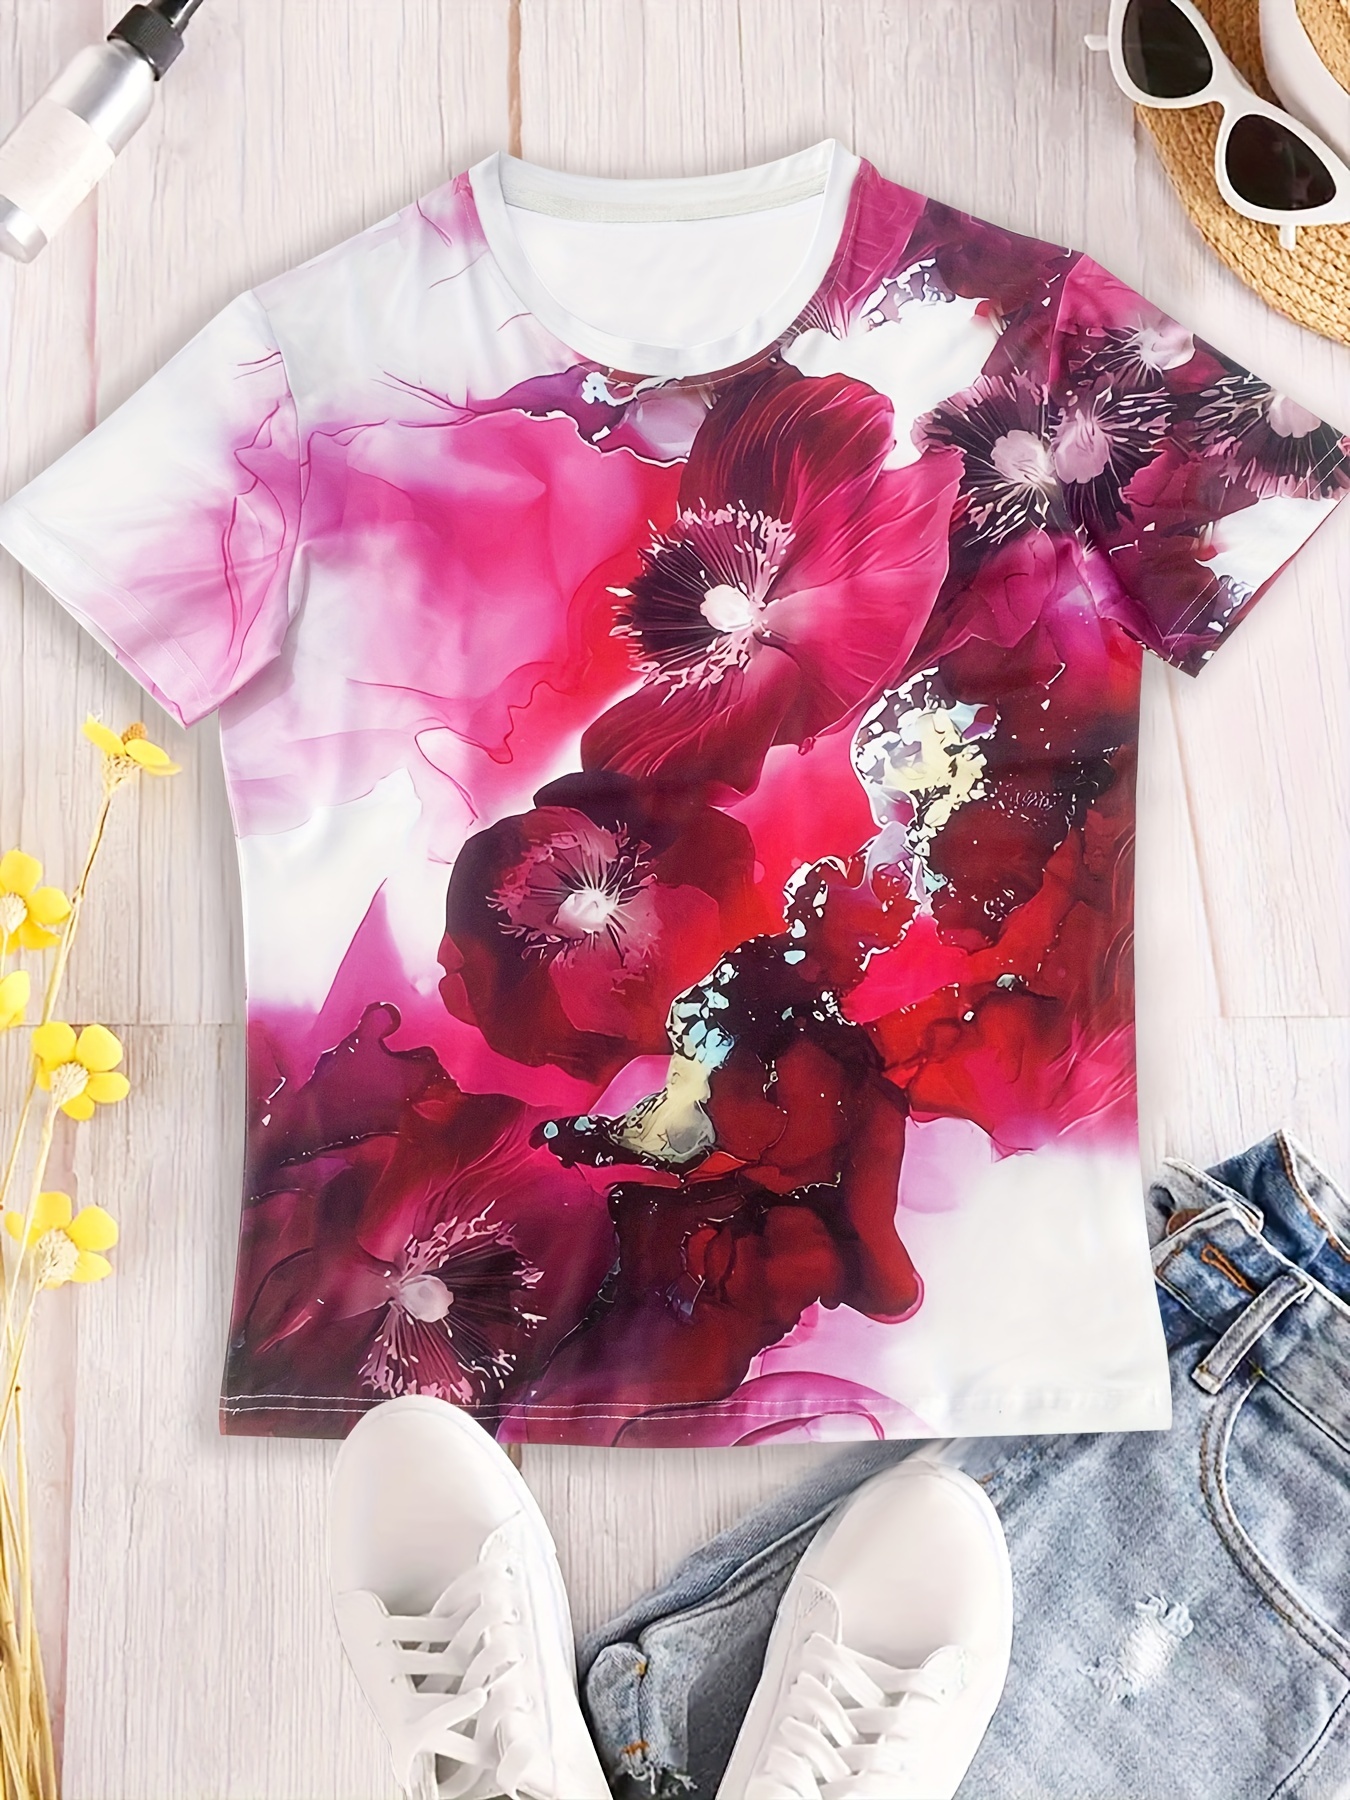 Big Flower Print Crew Neck T-shirt, Casual Short Sleeve Top For